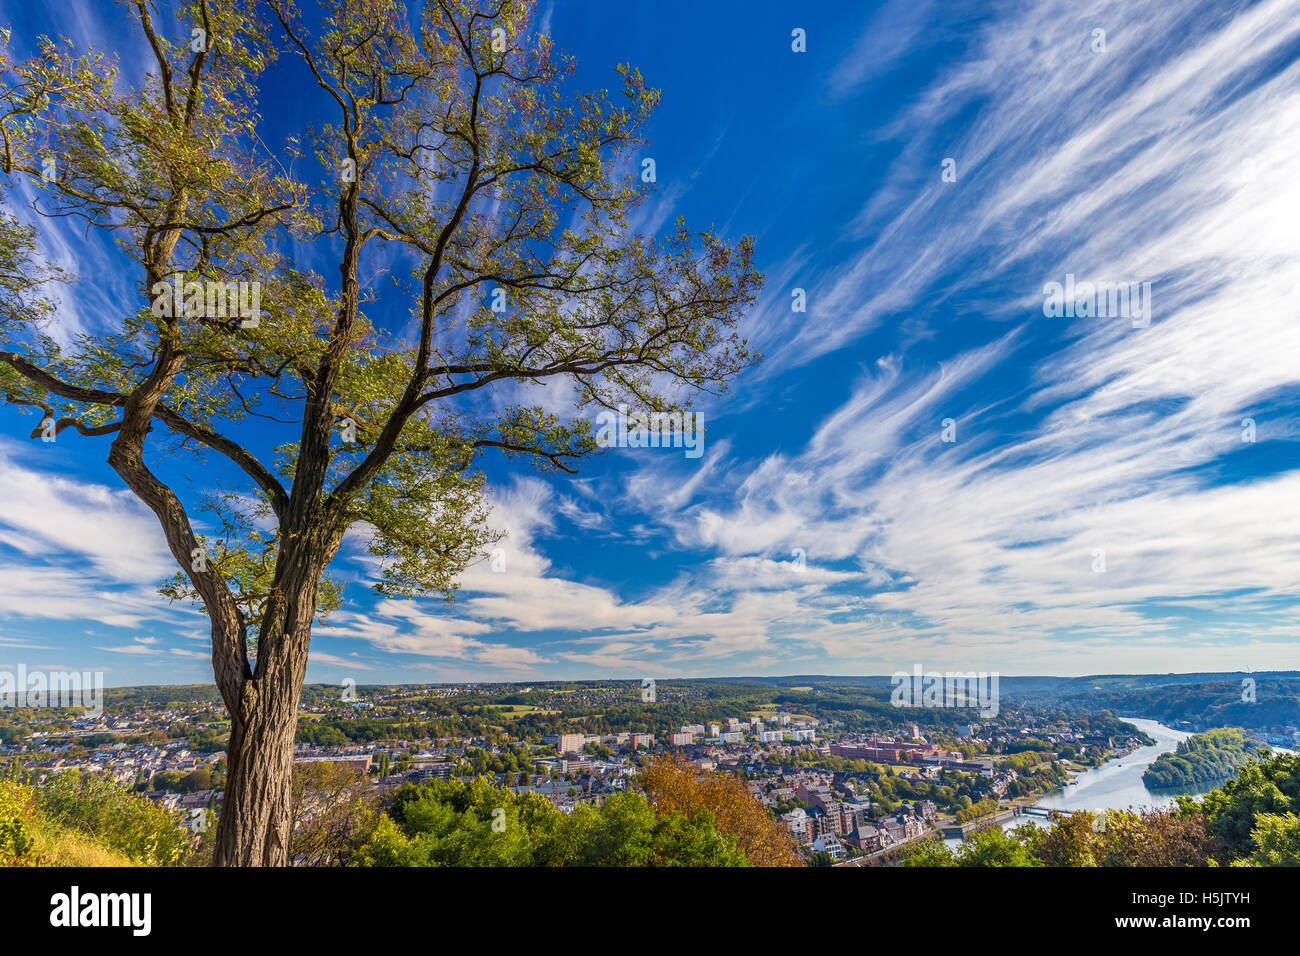 Aerial view of city Namur and Meuse river, Belgium Stock Photo